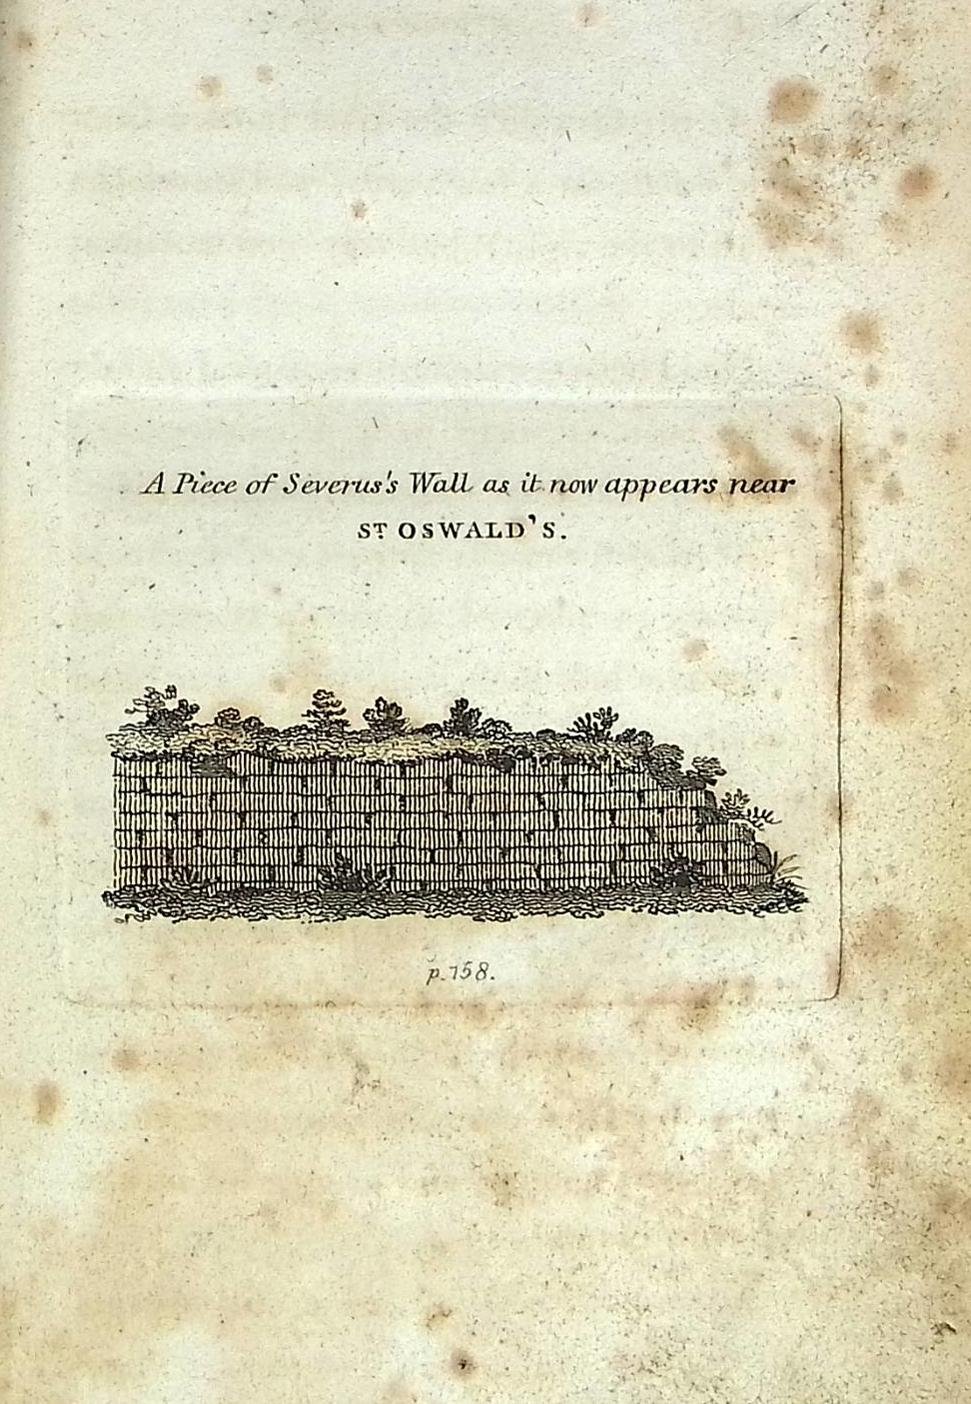 The History of the Roman Wall, which Crosses the Island of Britain, from the German Ocean to the Irish Sea. Describing its Antient State and its Appearance in the Year 1801.